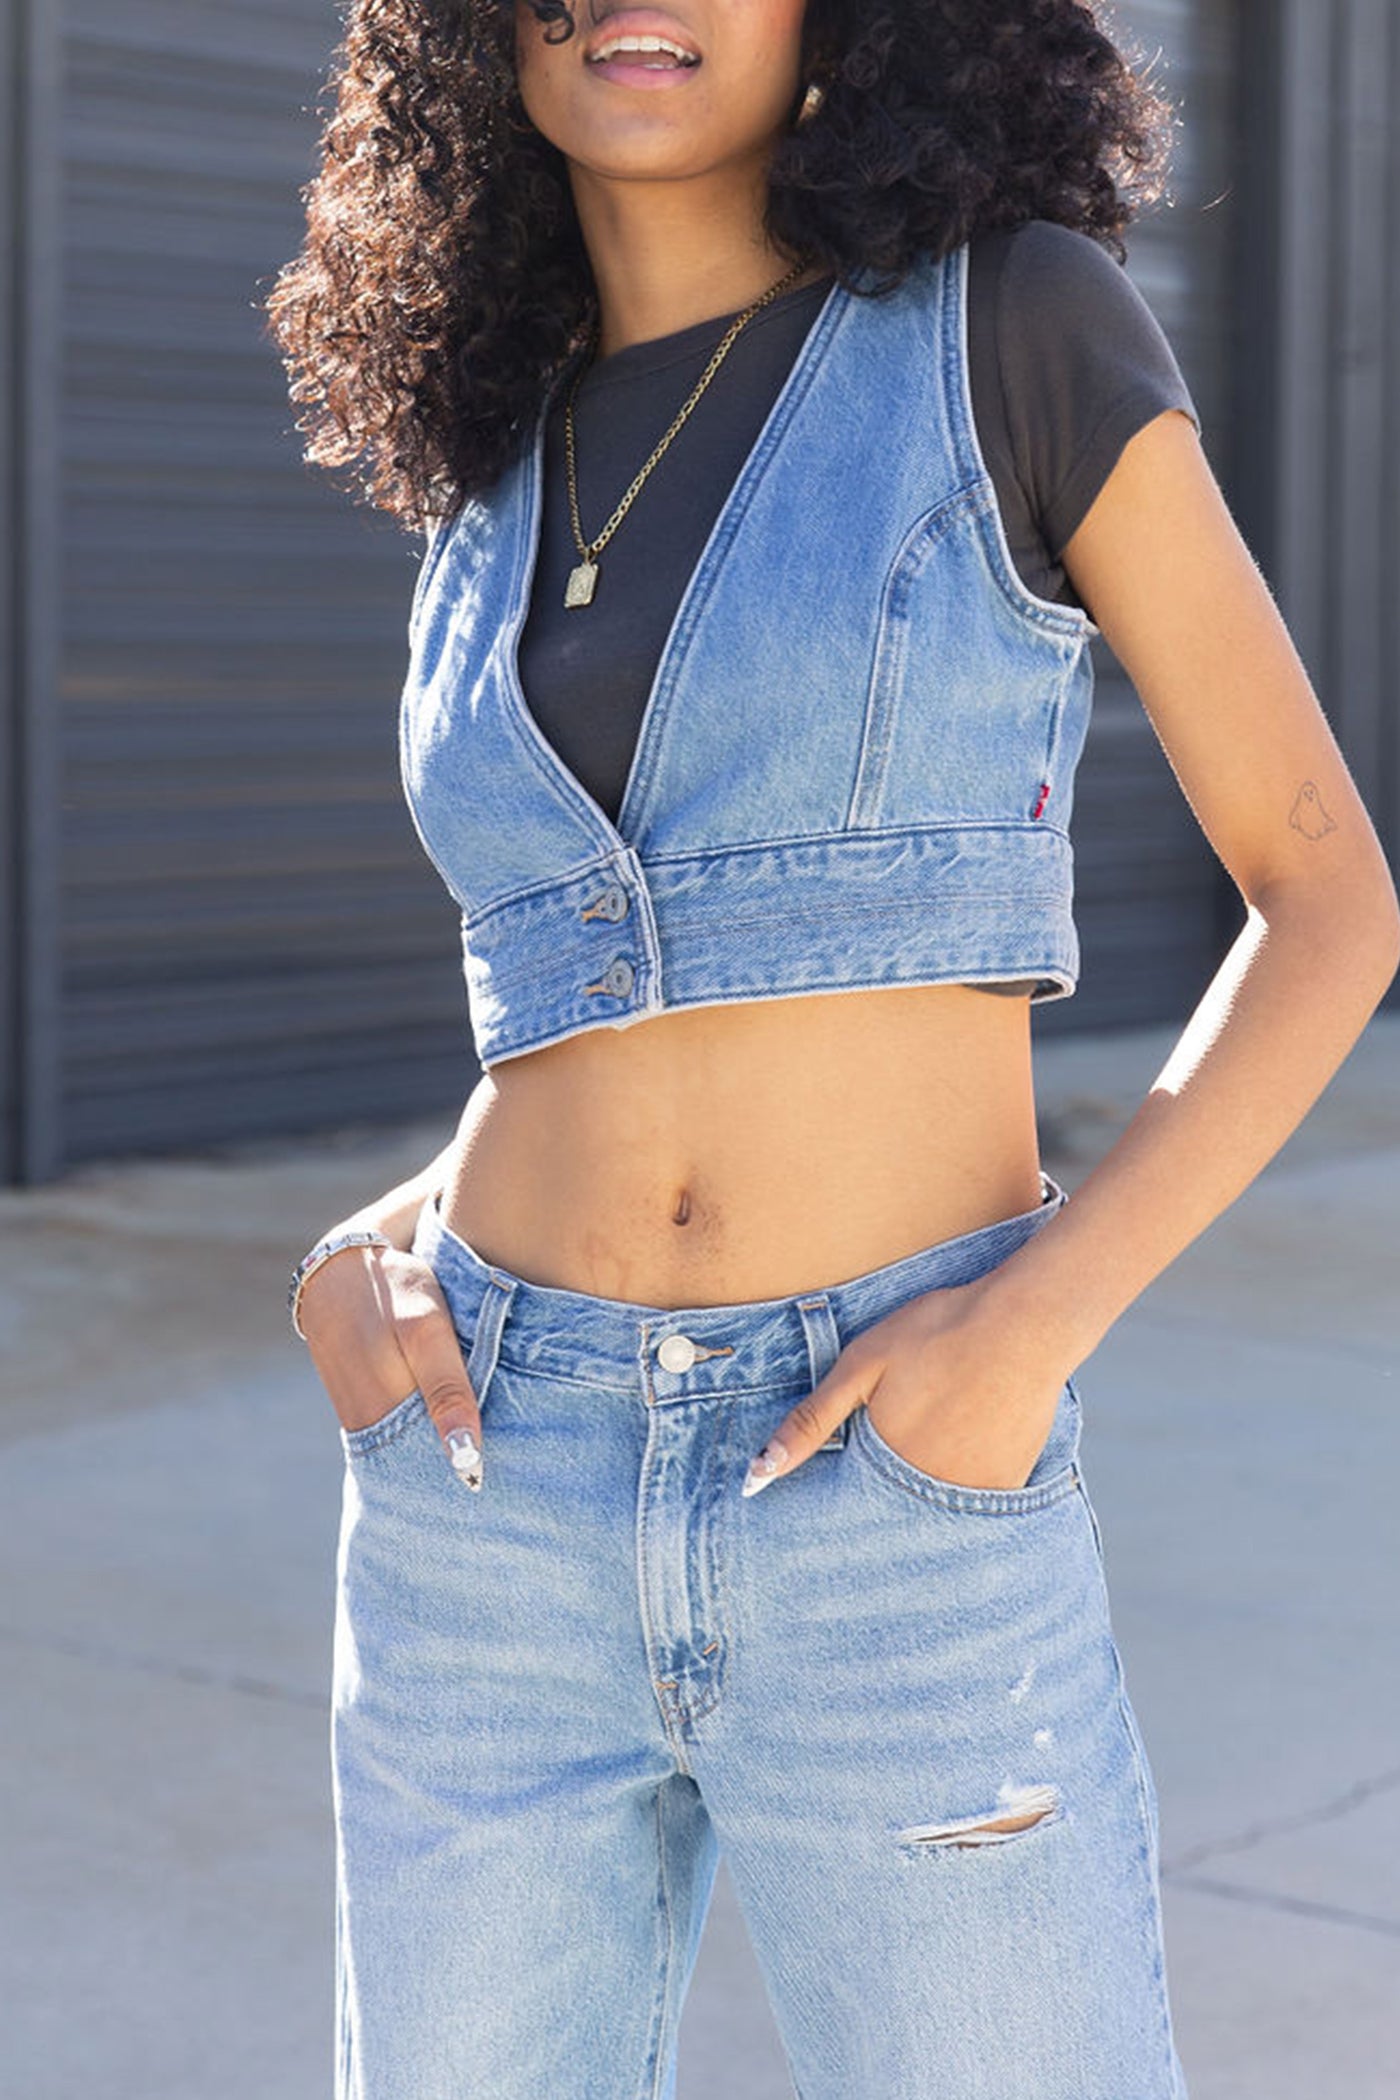 Check Yourself Denim Vest by Levi's